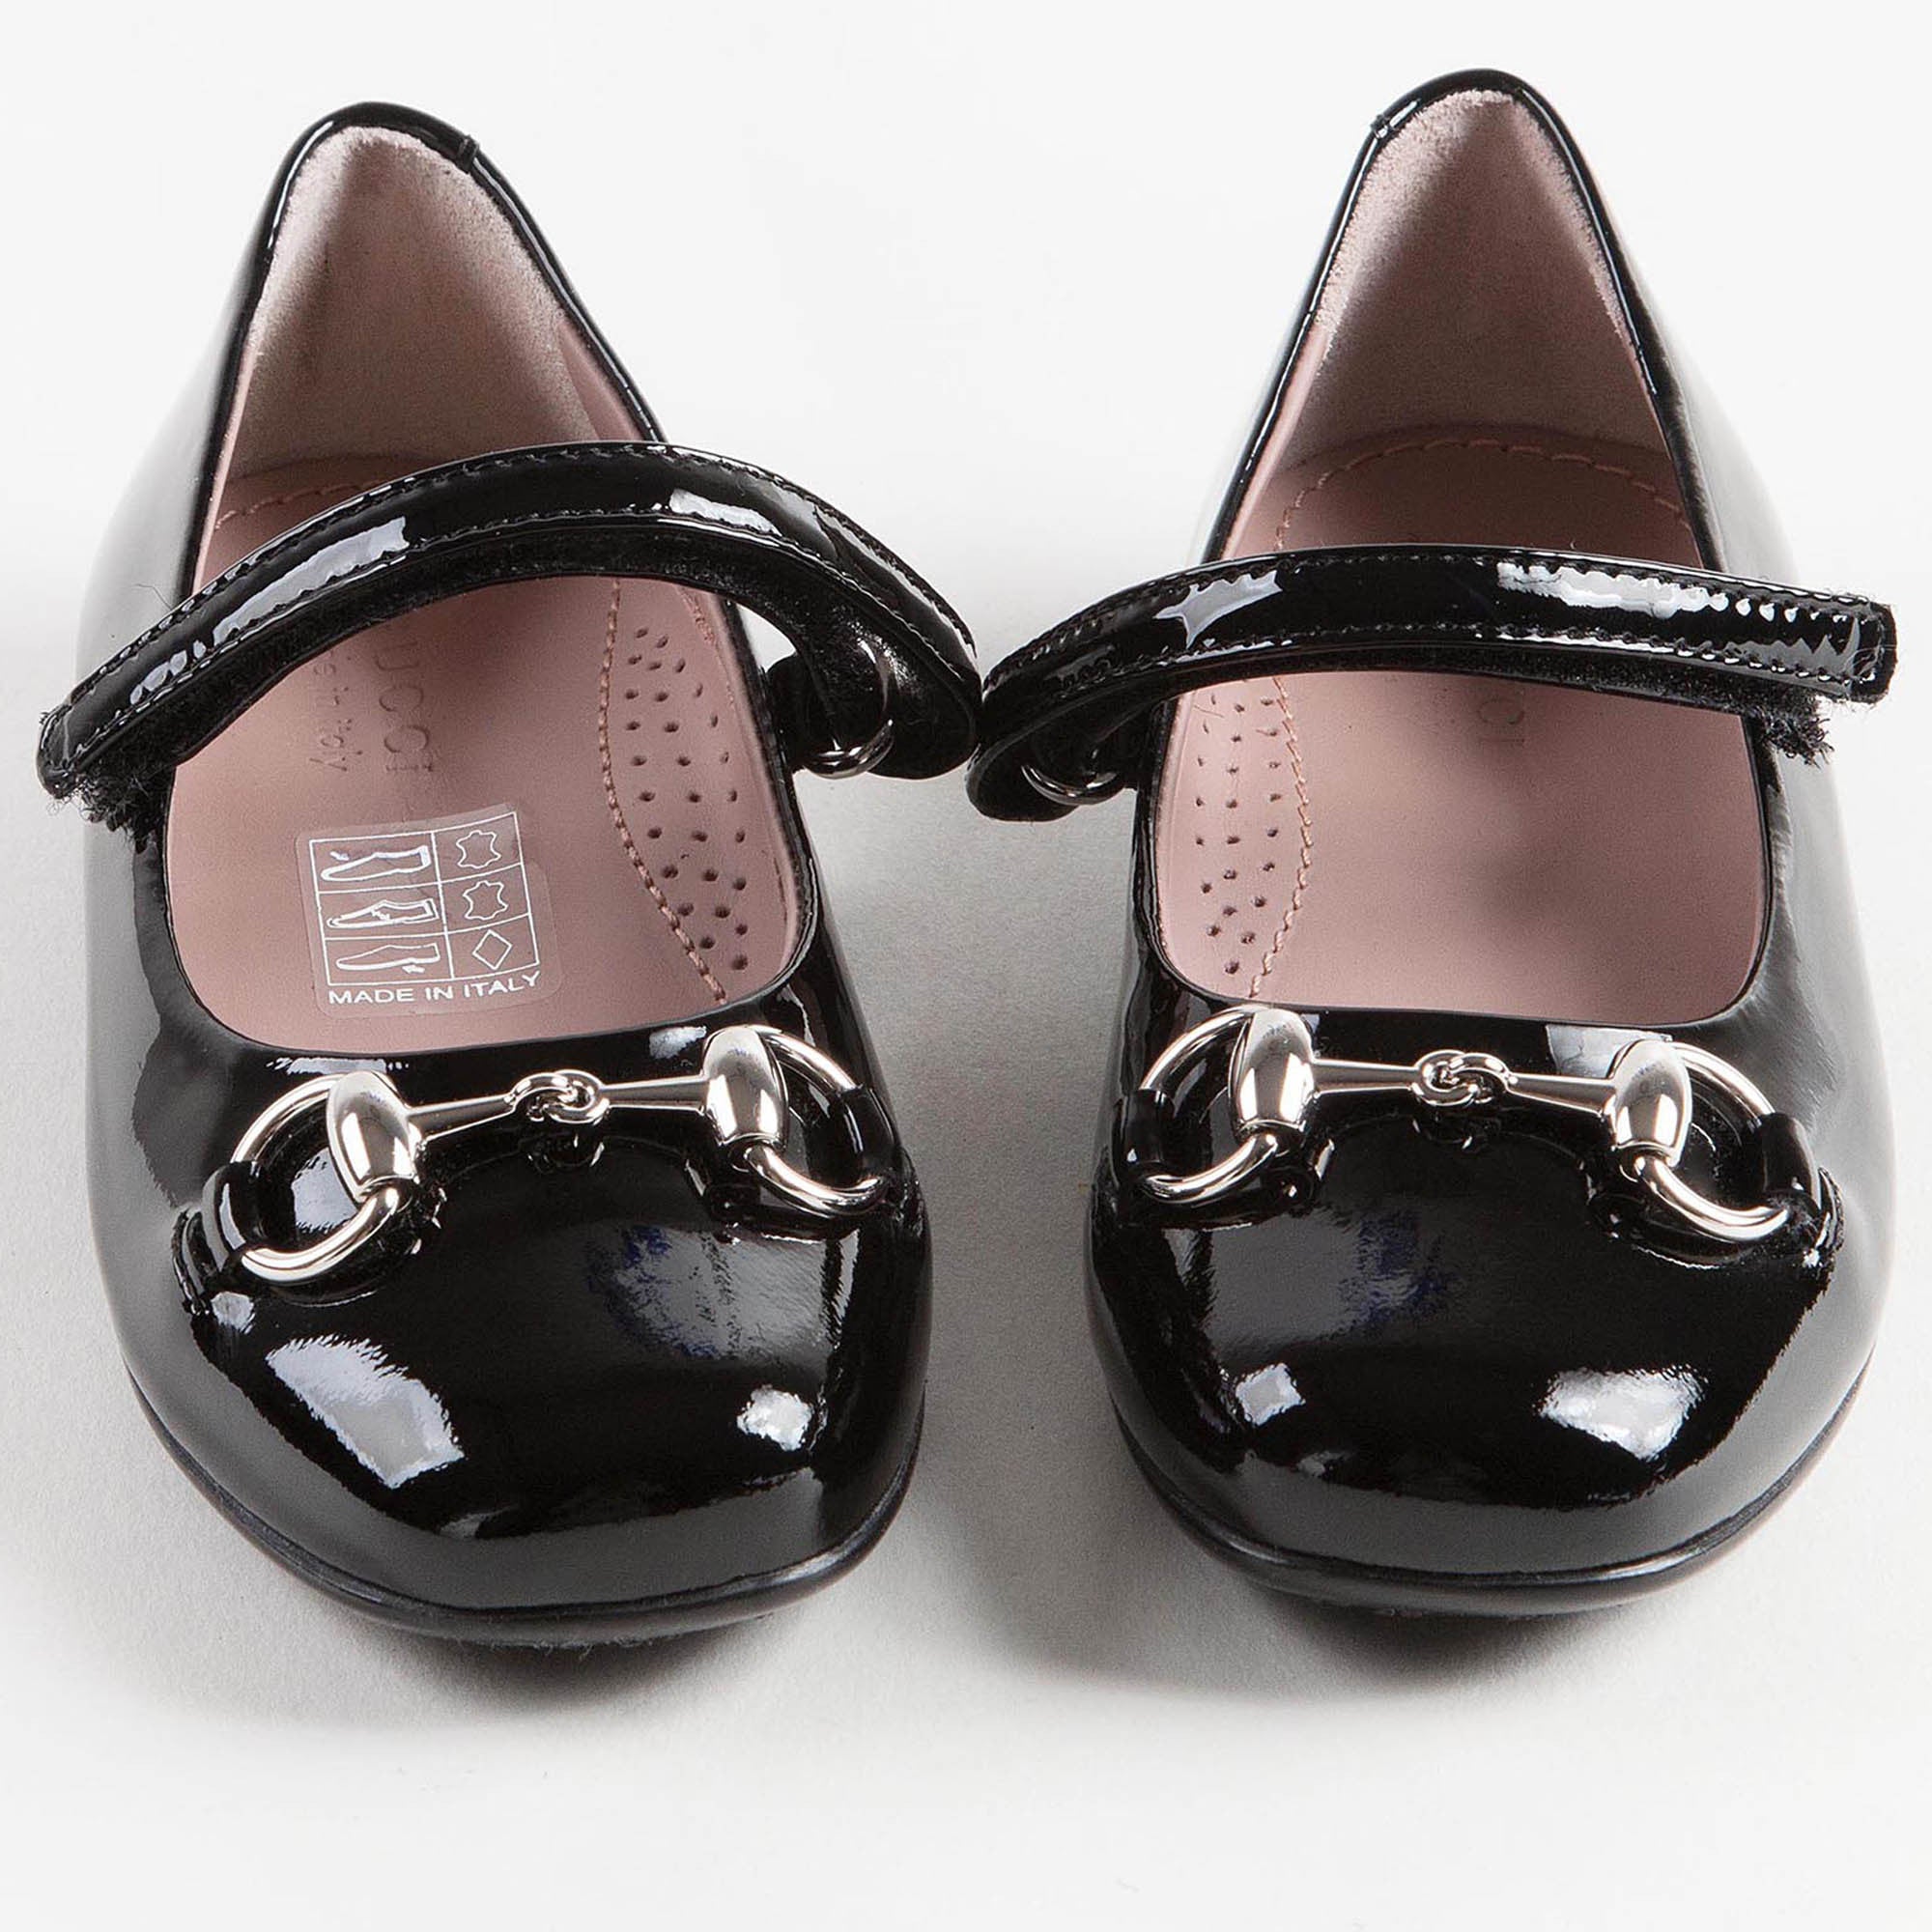 Baby Girls Black Patent Leather Shoes With Horsebit - CÉMAROSE | Children's Fashion Store - 2